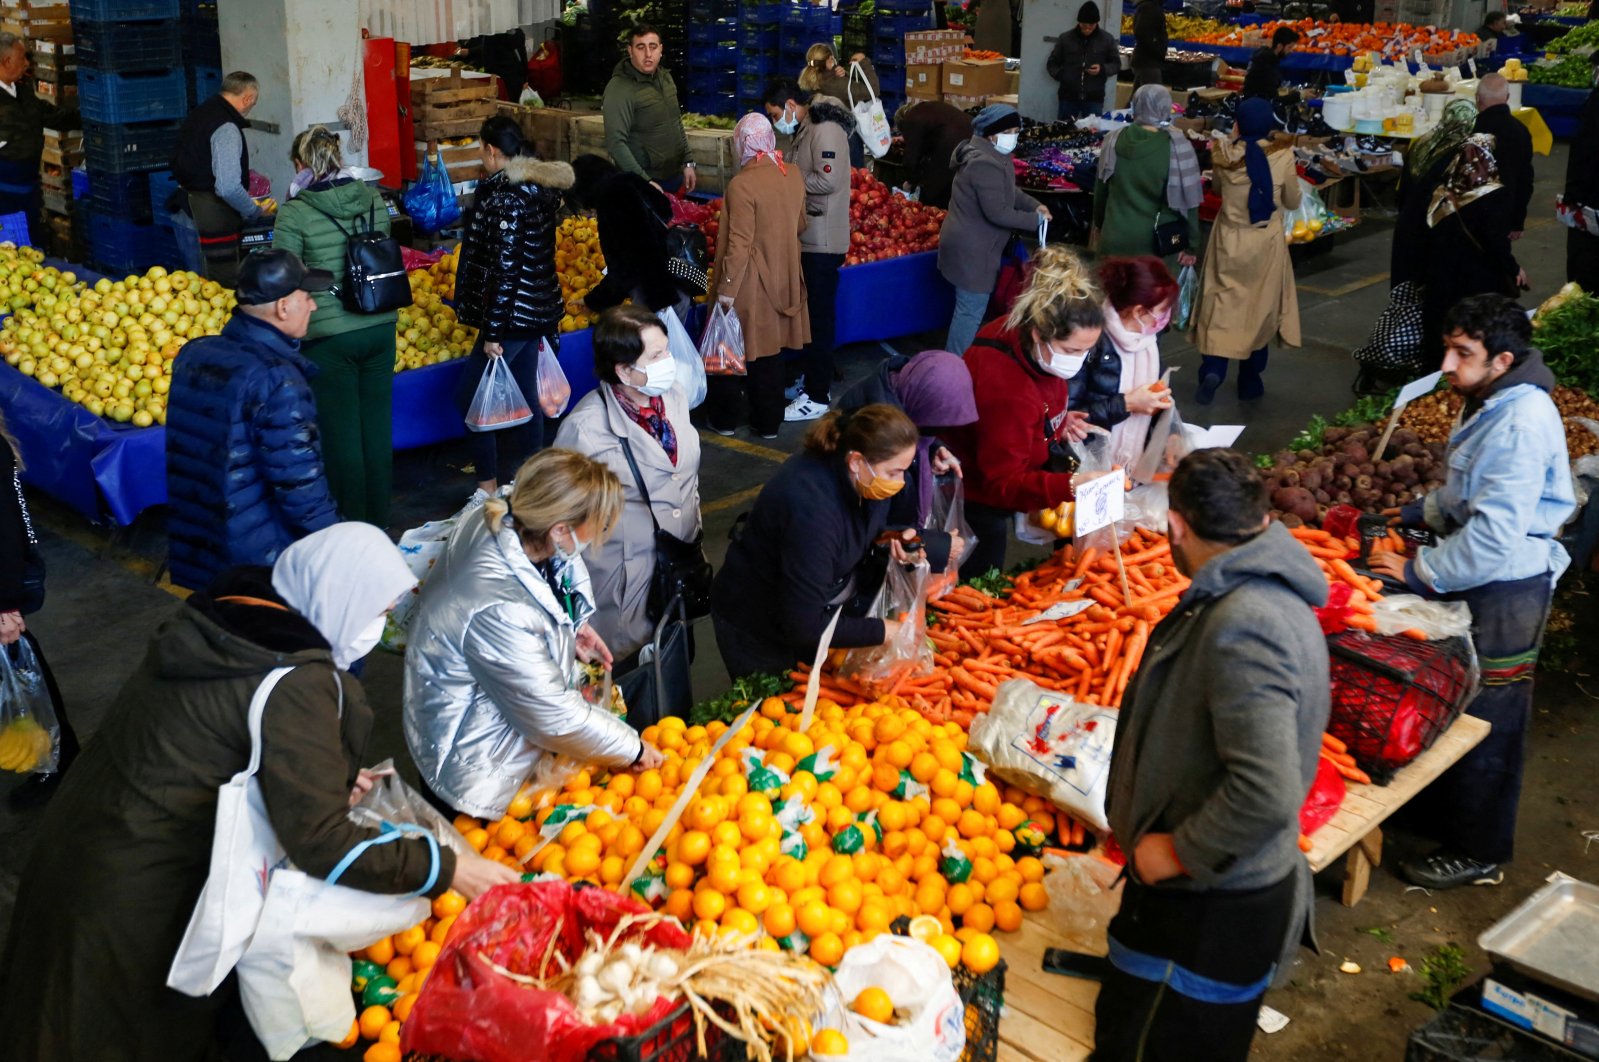 People shop at a market in Istanbul, Turkey, Jan. 4, 2022. (Reuters Photo)